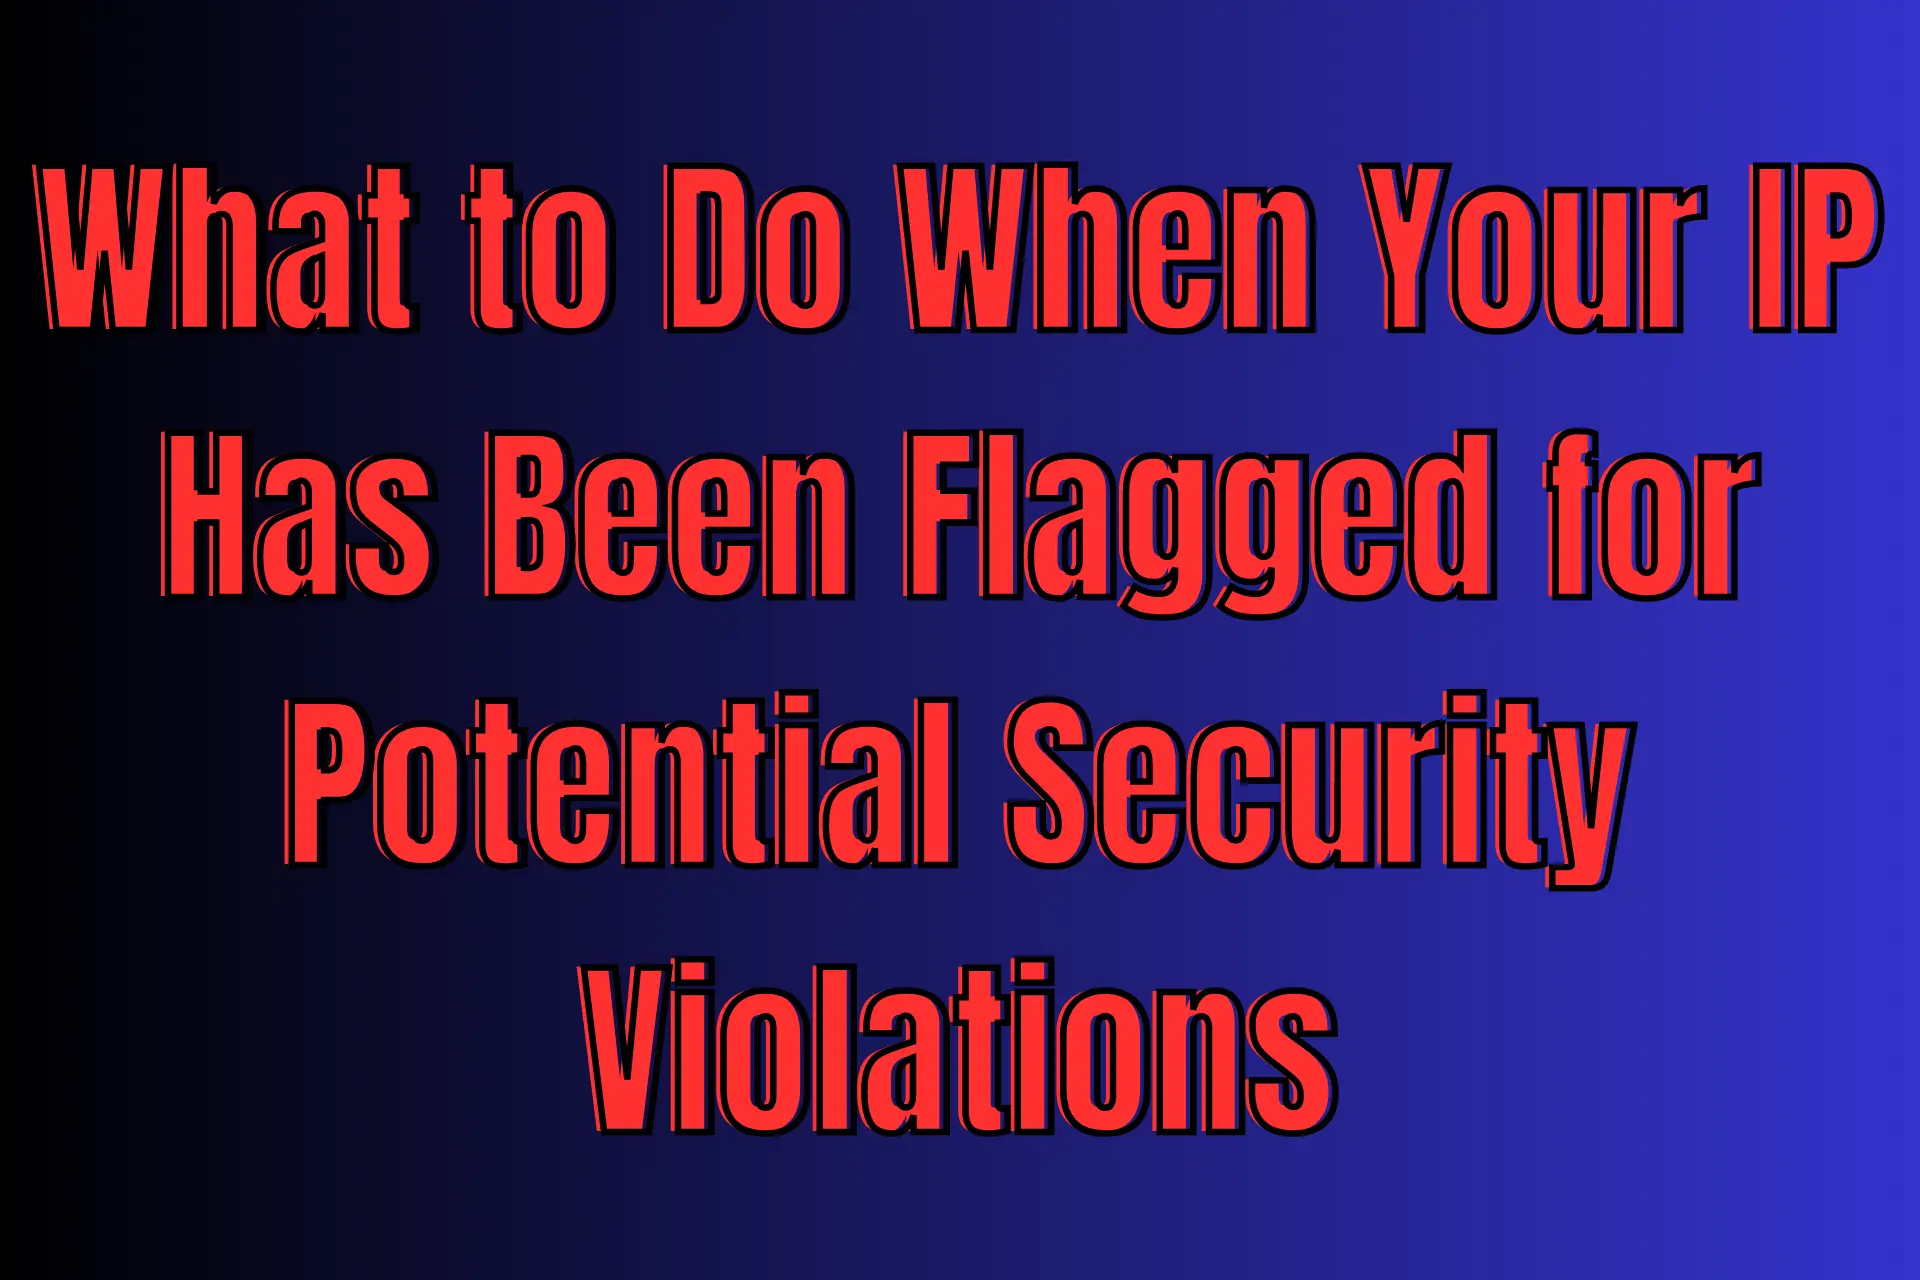 Your IP has been flagged for potential security violations